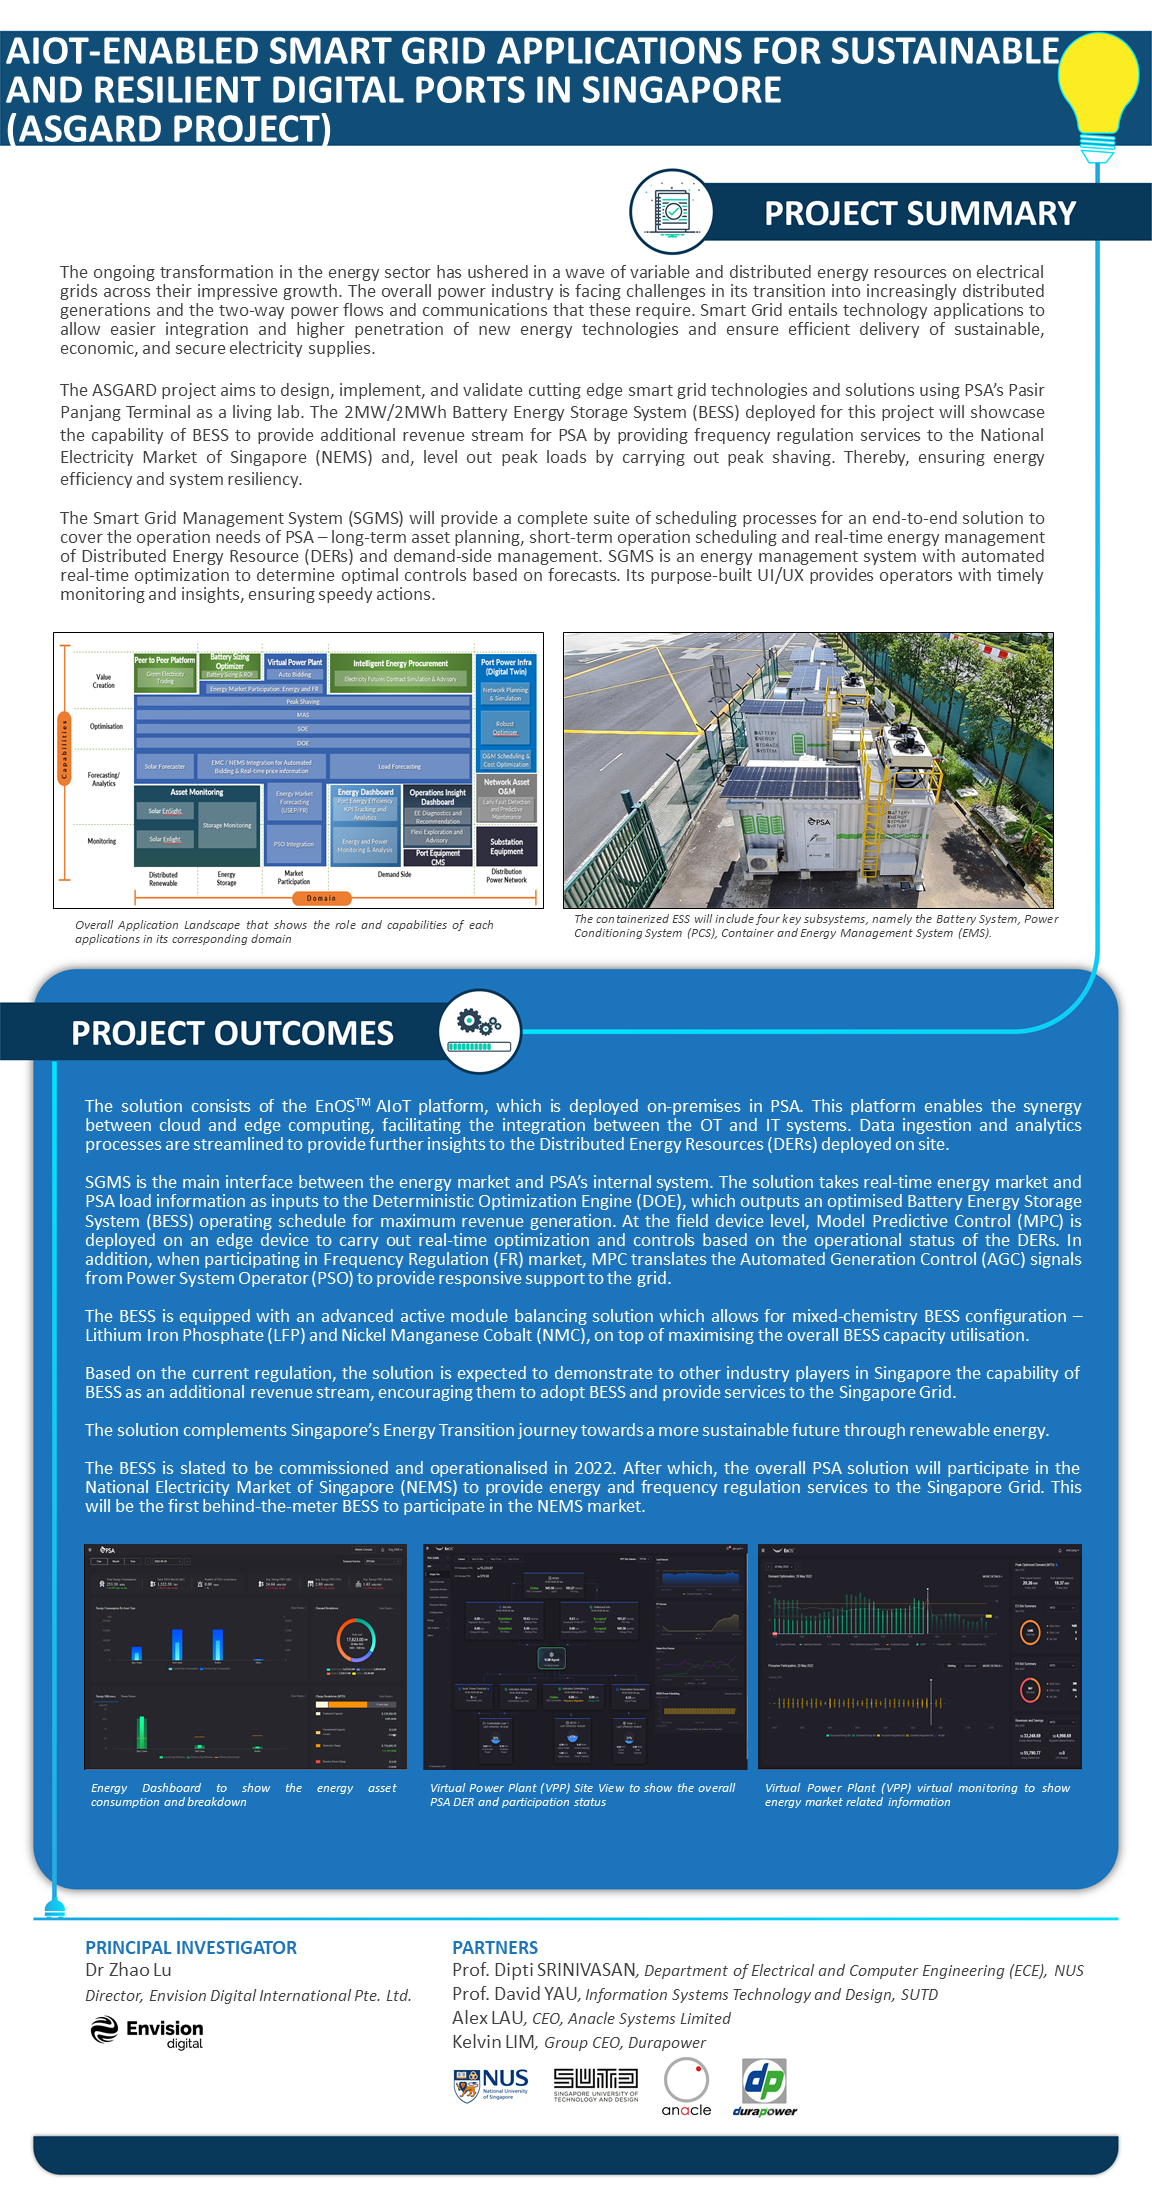 AIoT-Enabled Smart Grid Applications for Sustainable and Resilient Digital Ports in Singapore (ASGARD Project)